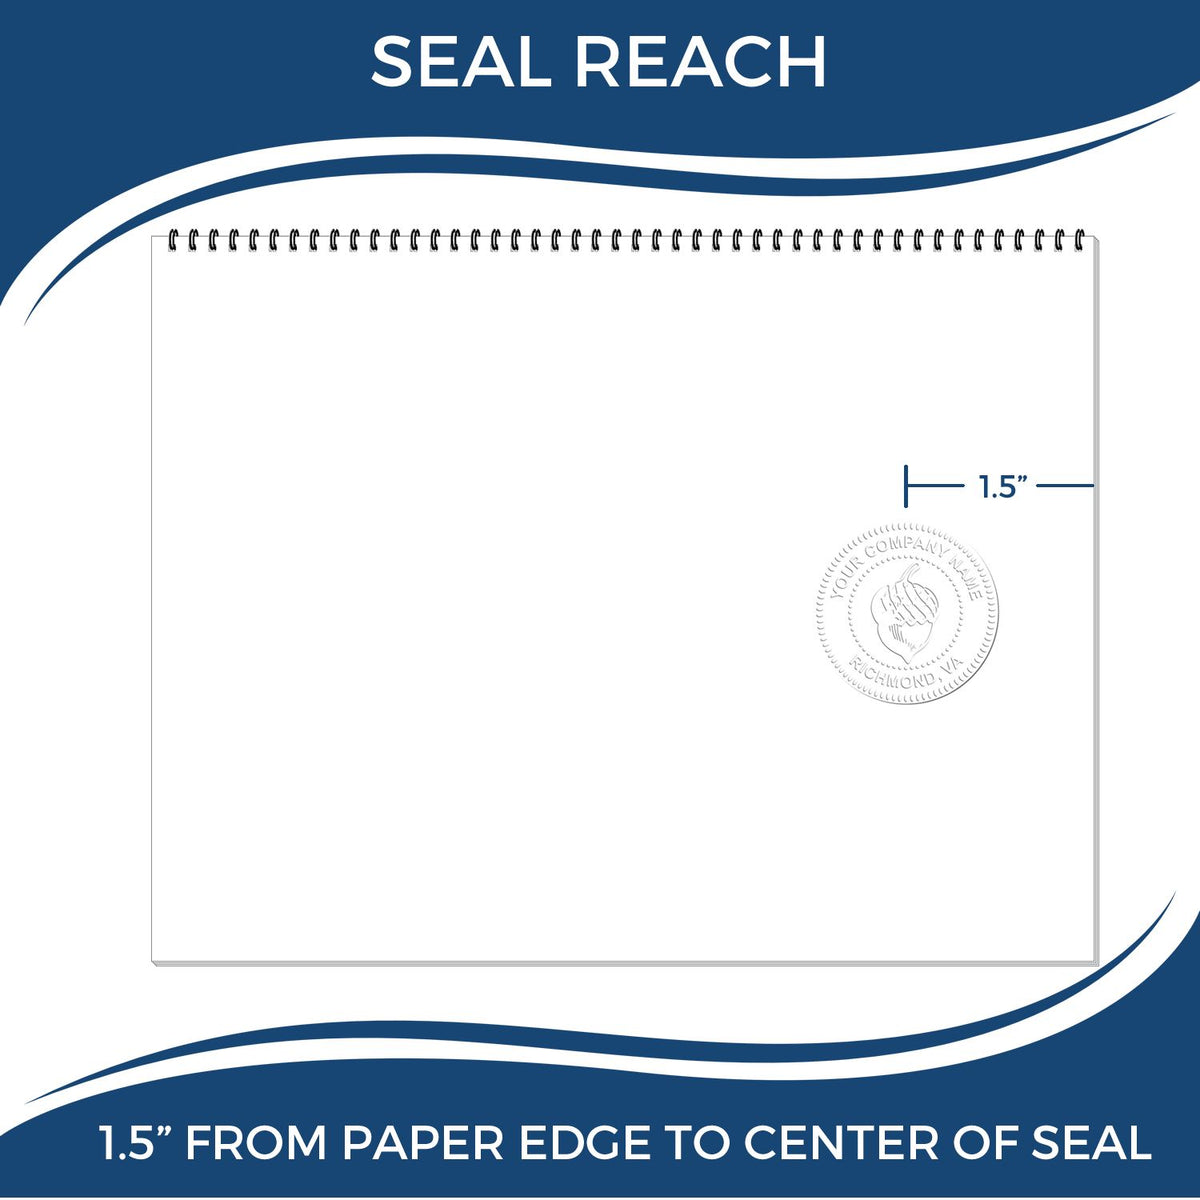 An infographic showing the seal reach which is represented by a ruler and a miniature seal image of the Hybrid Nevada Geologist Seal